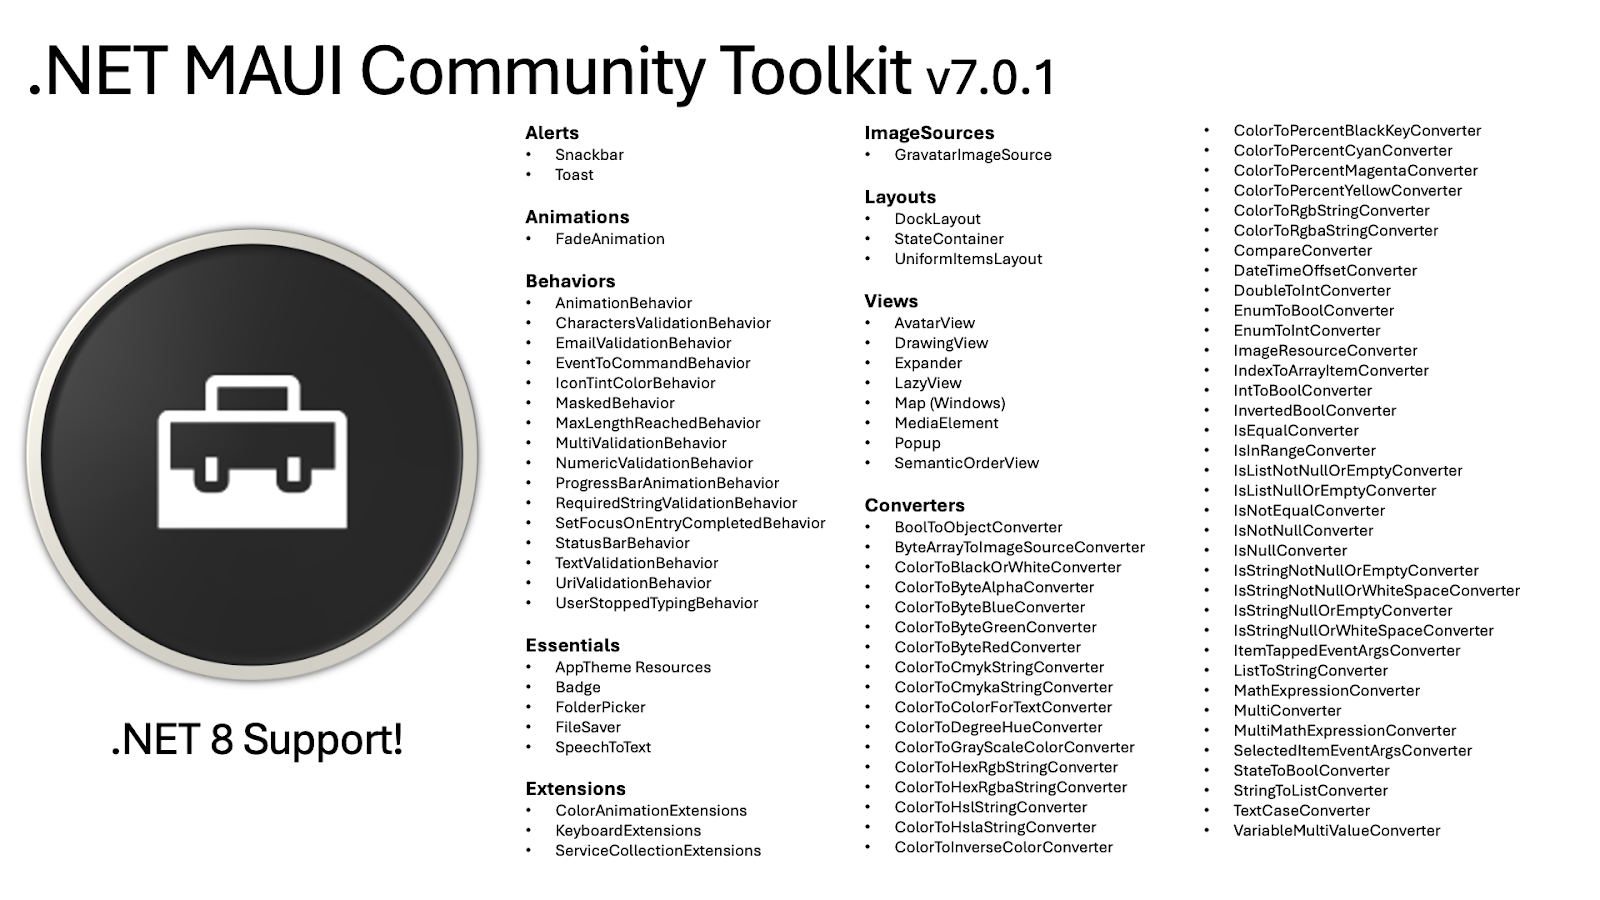 image showing the feature list and components of .NET MAUI Community Toolkit v7.0.1